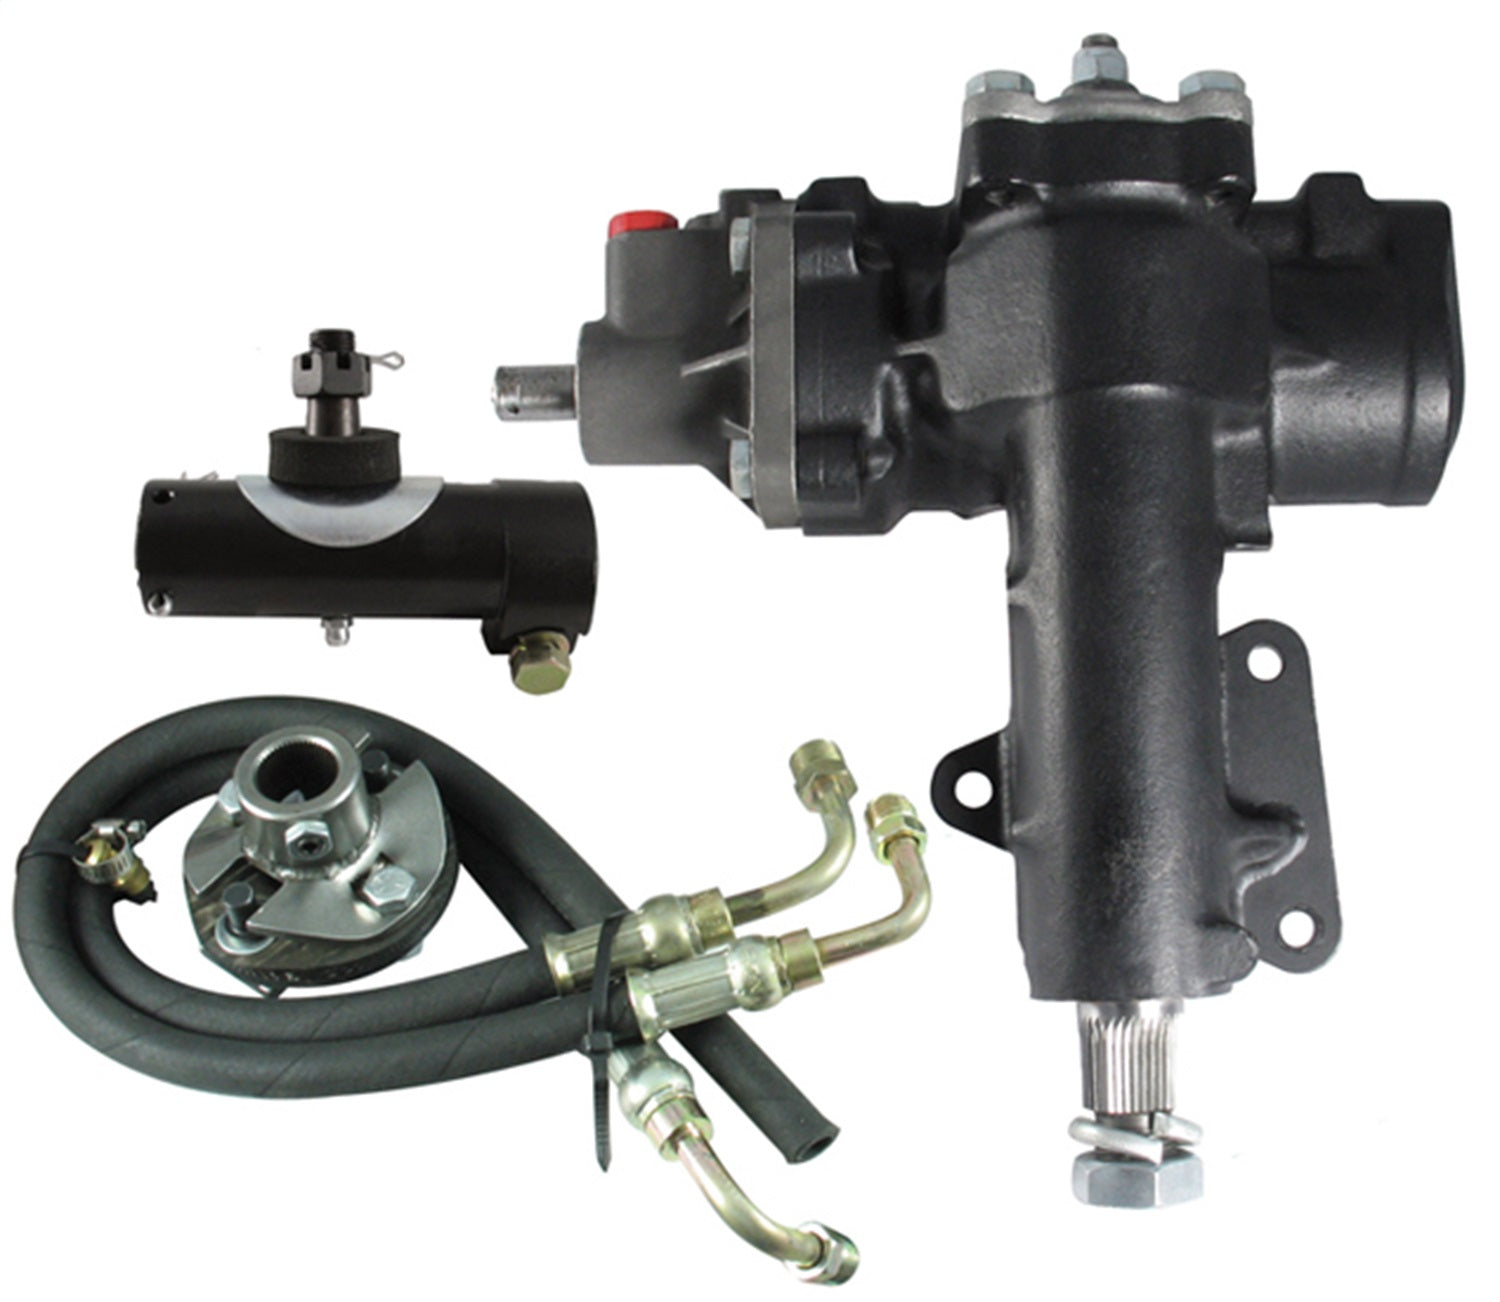 Borgeson Power Steering Conversion Kit. 67-82 Corvette with factory P/S 12.7:1 ratio. 999032